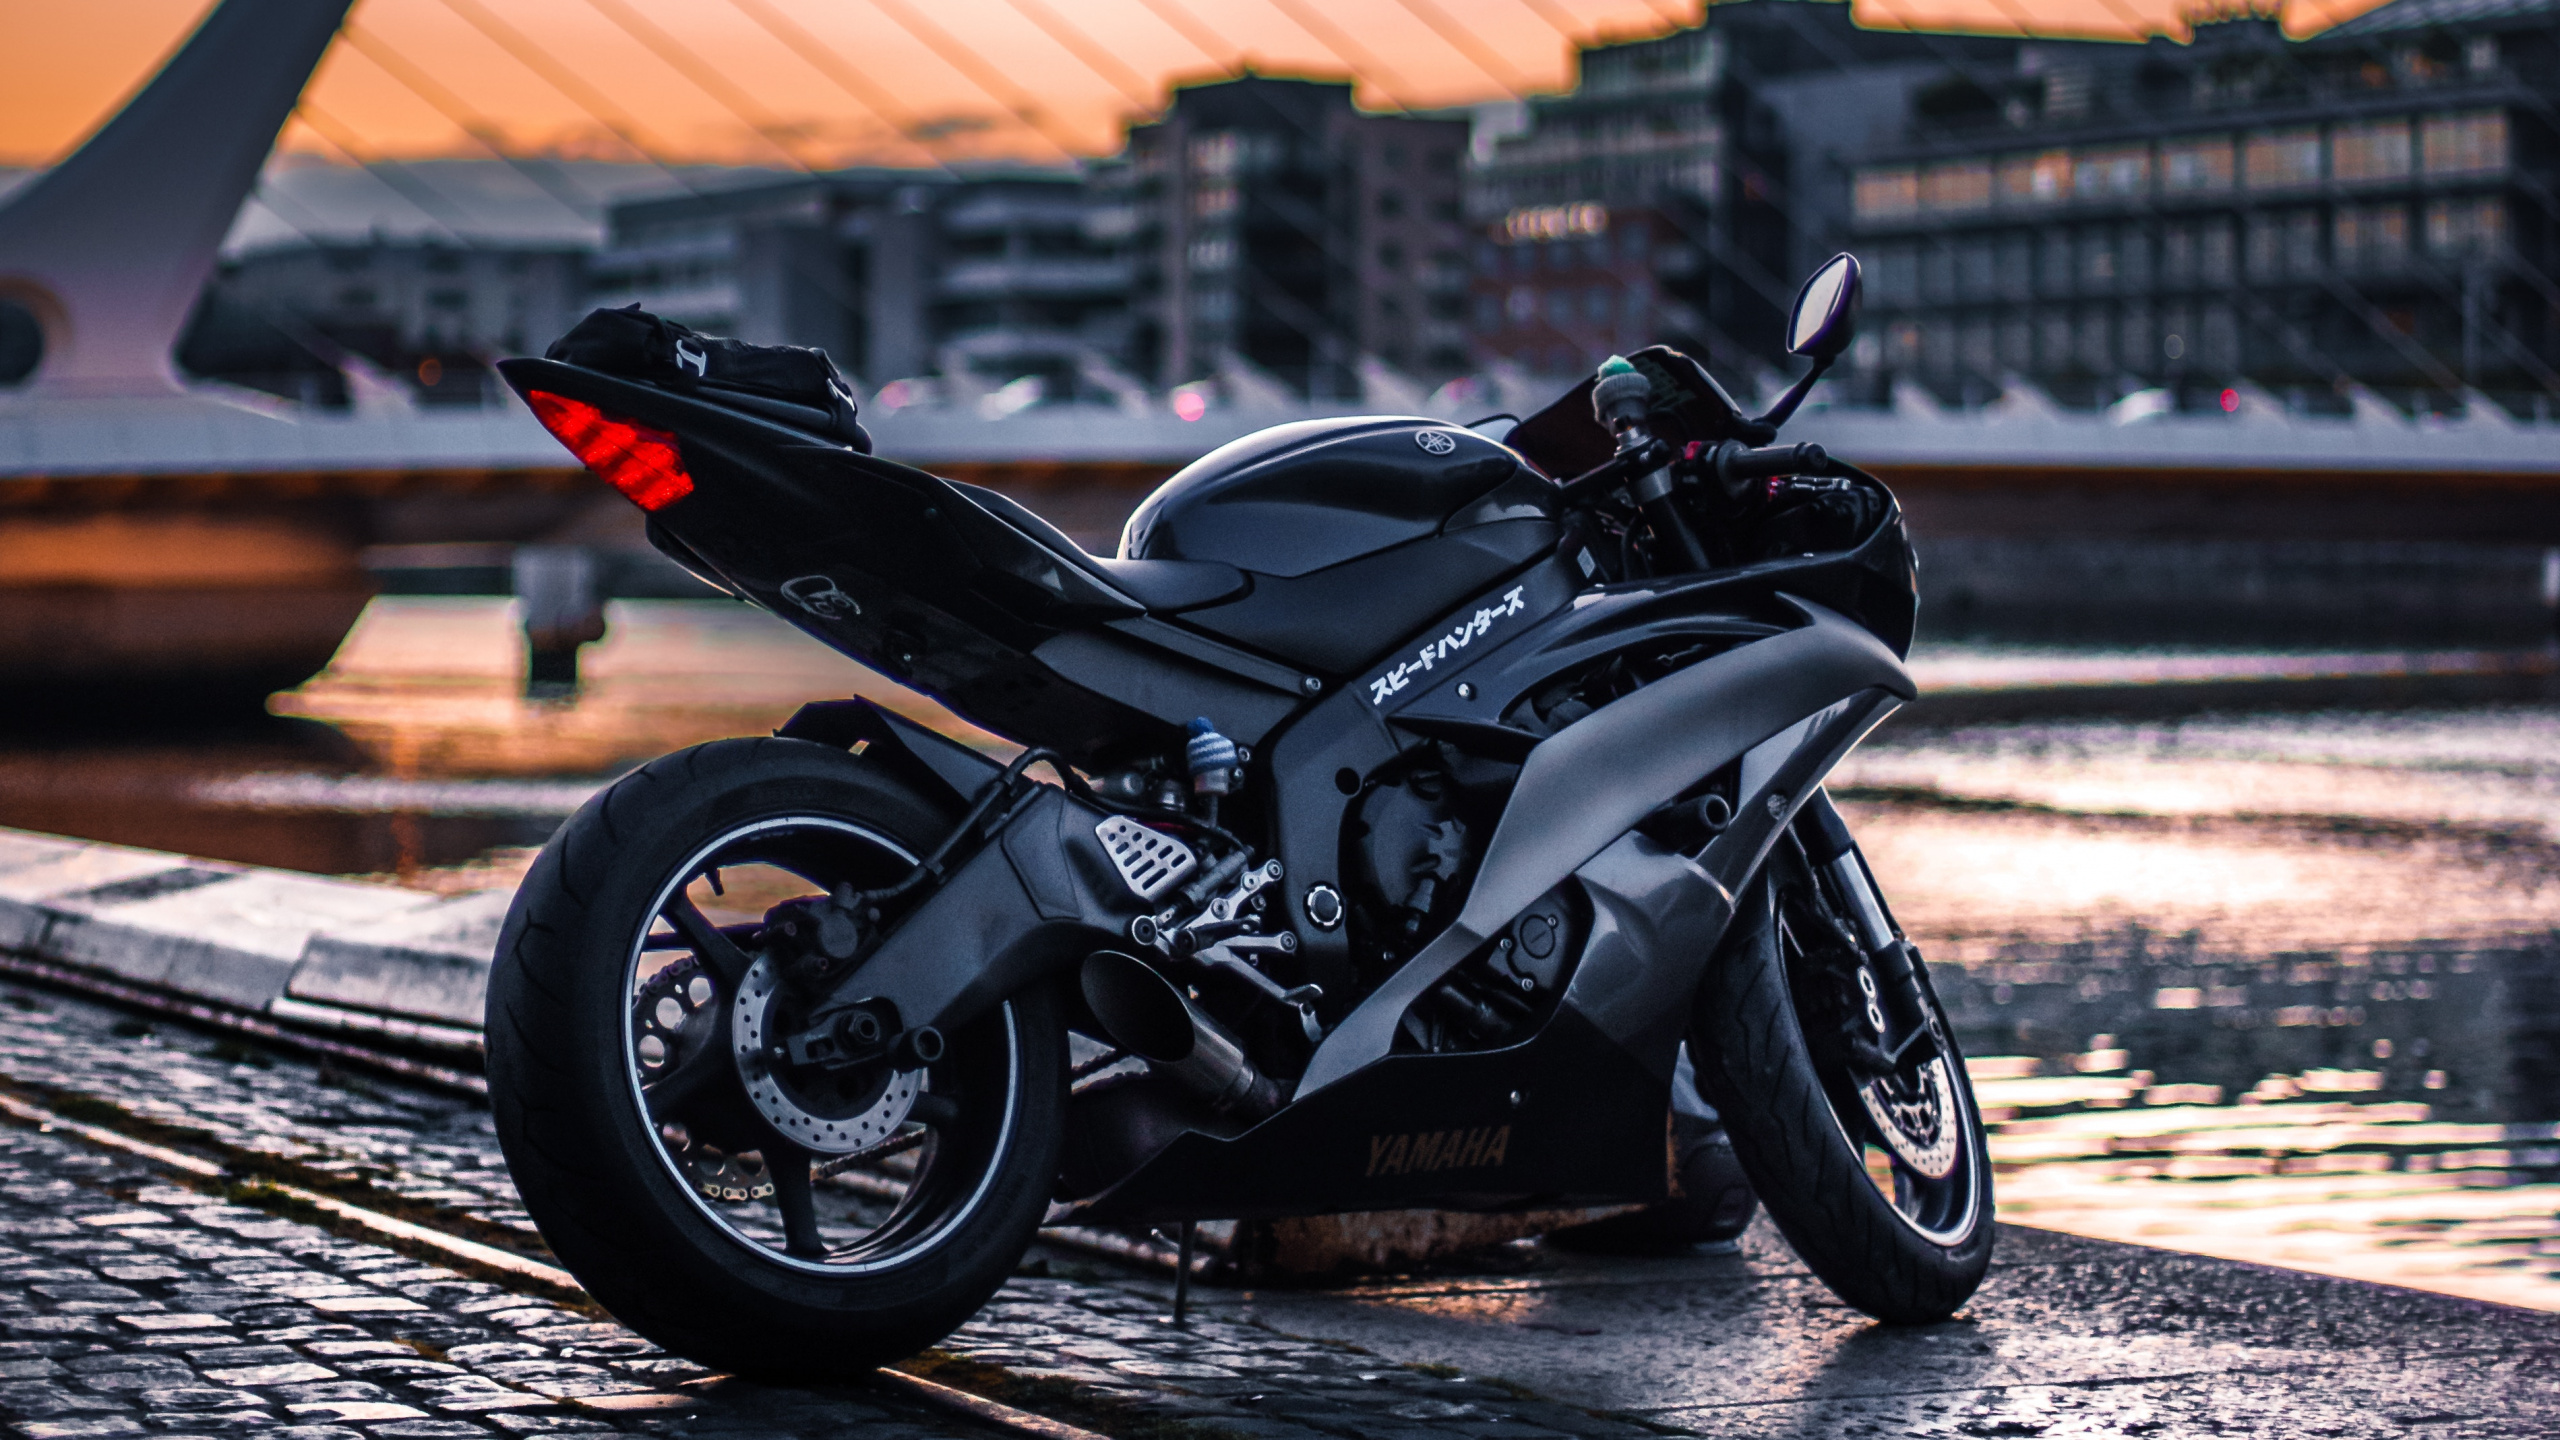 Black Sports Bike Parked on The Side of The Road. Wallpaper in 2560x1440 Resolution